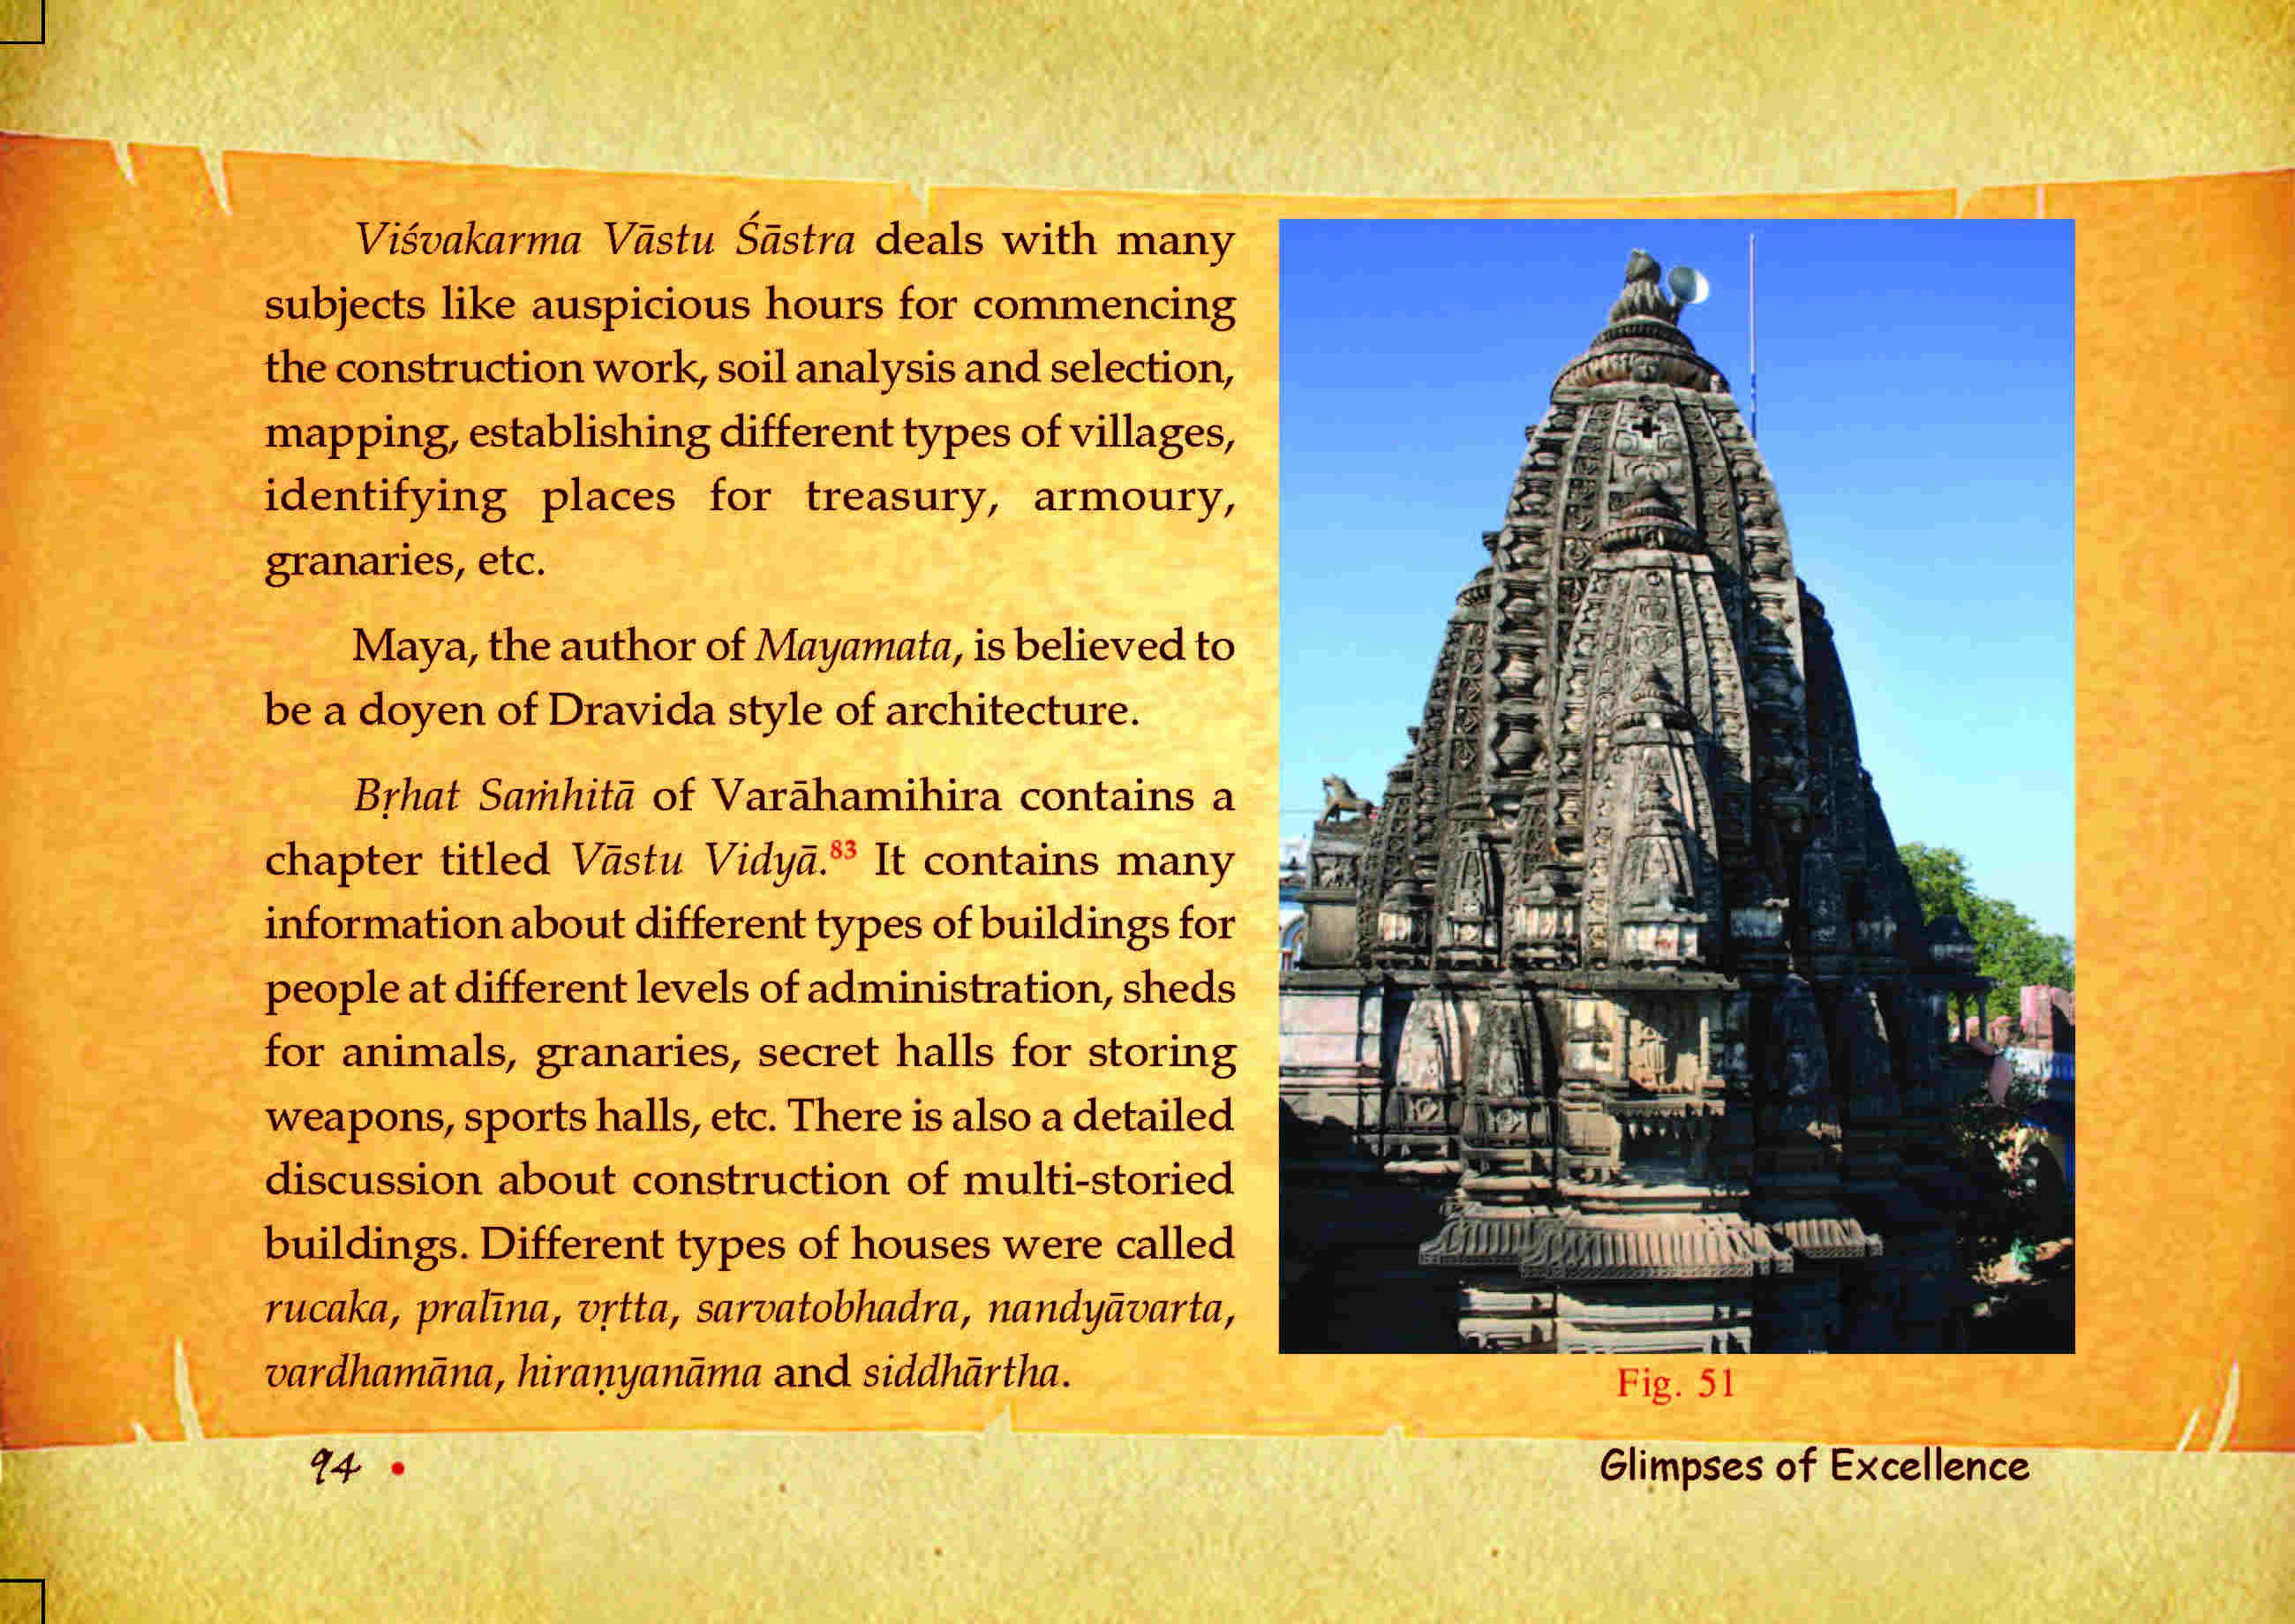 Glimpses of Excellence - In Ancient India